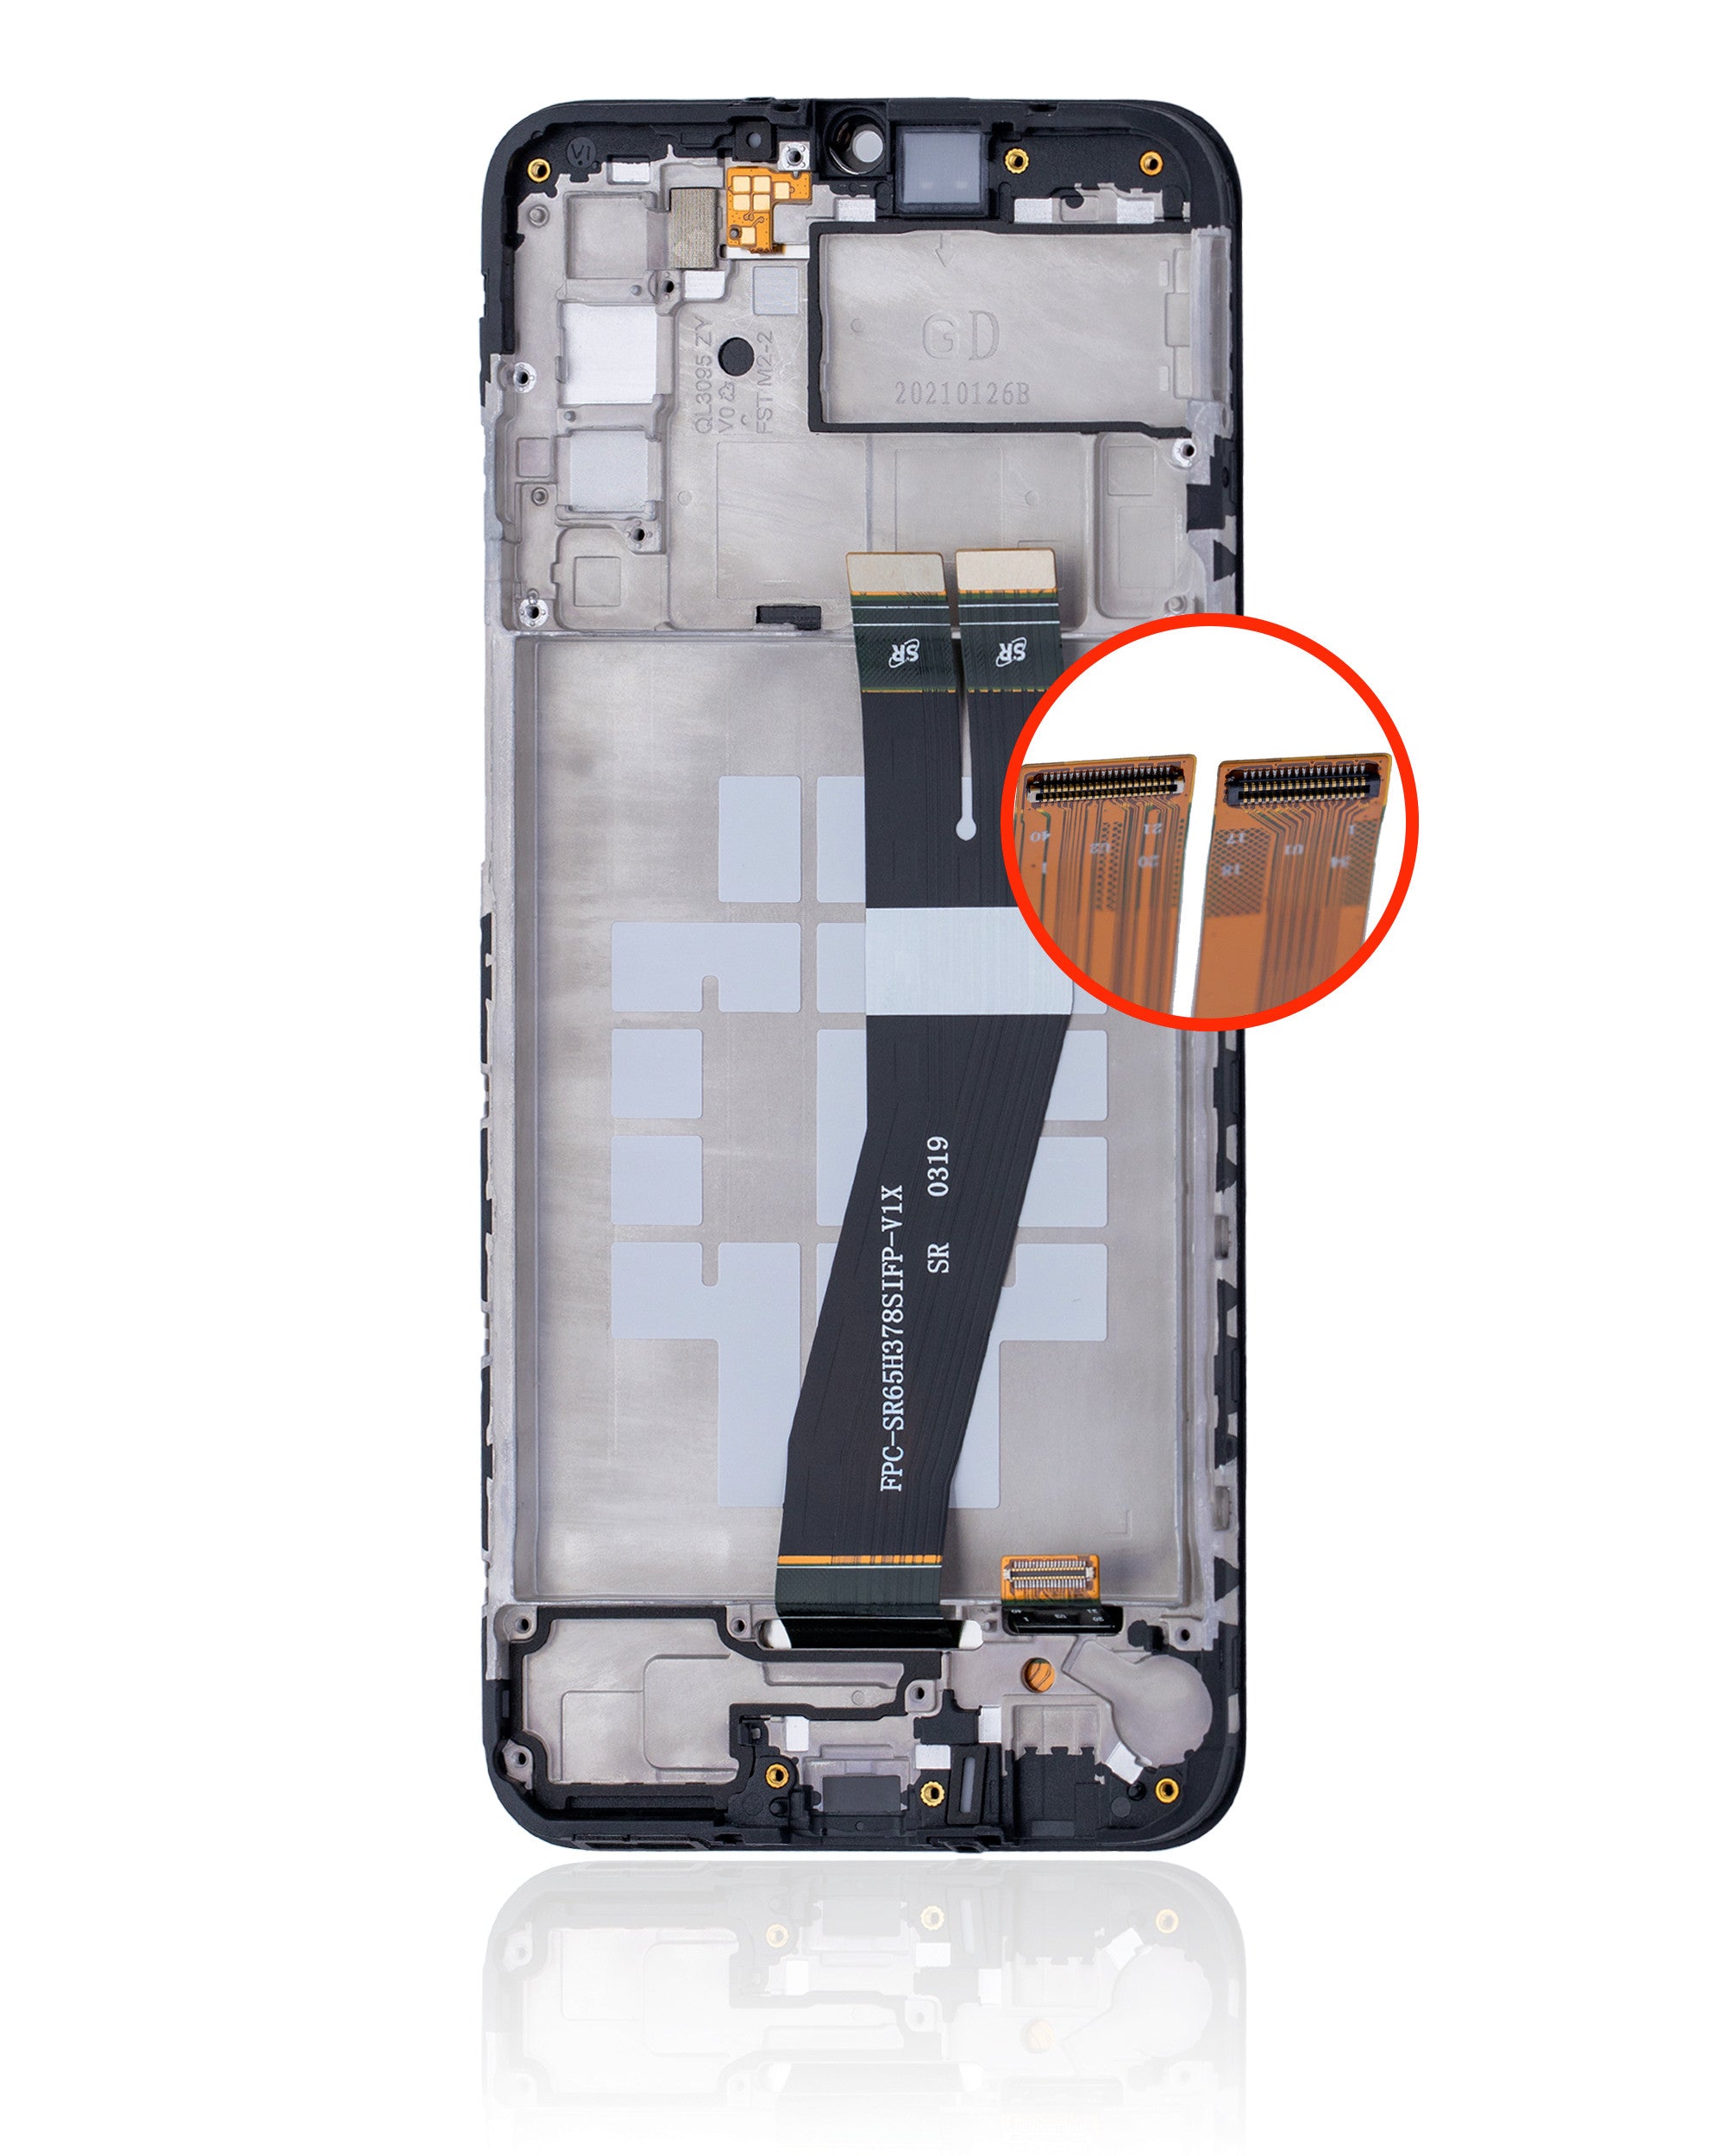 For Samsung Galaxy A02S (A025F / 2020) Screen Replacement With Frame (International Version) (All Colors)